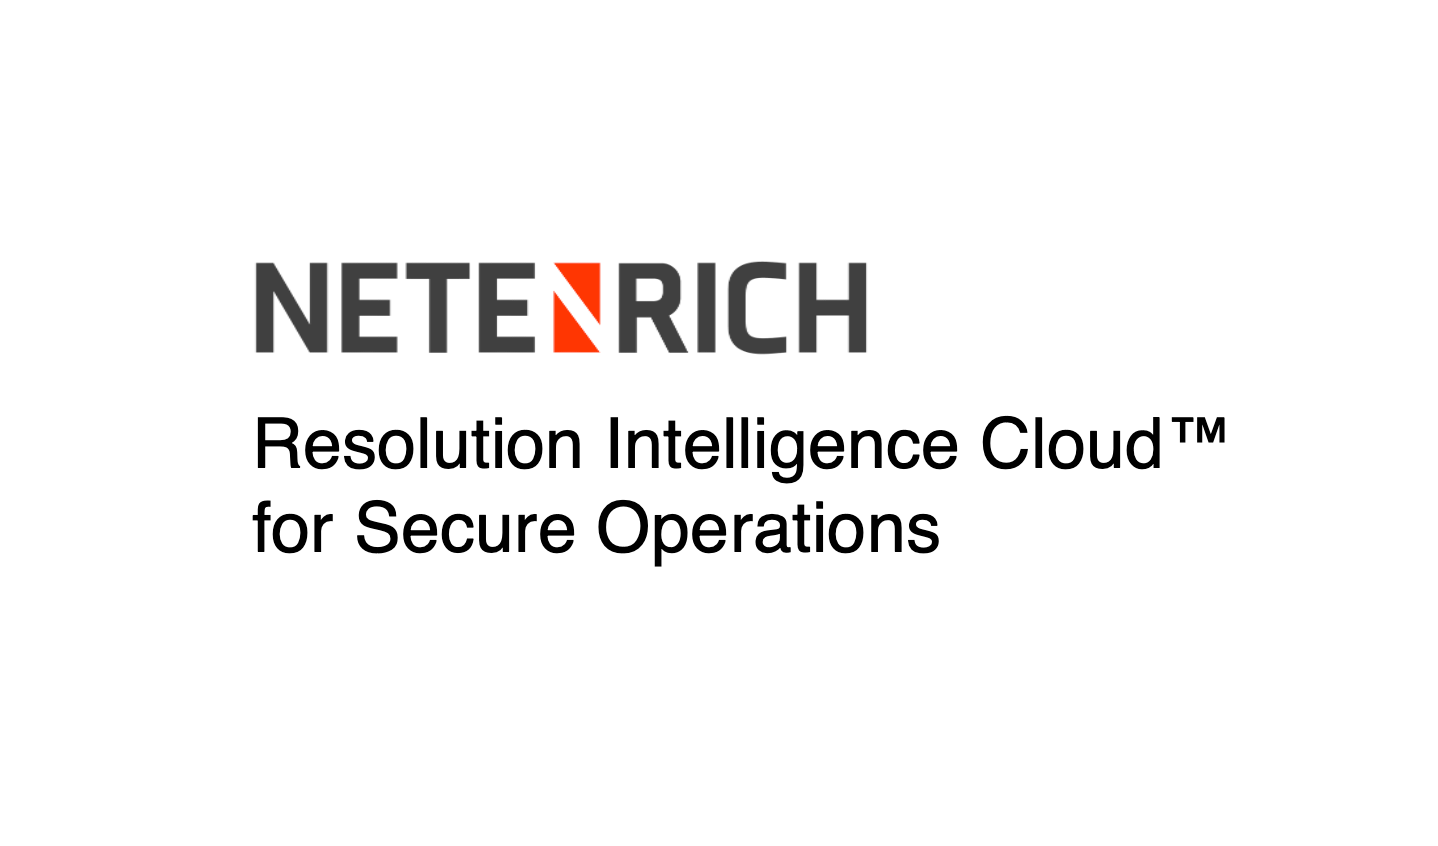 Netenrich Resolution Intelligence Cloud for Secure Operations